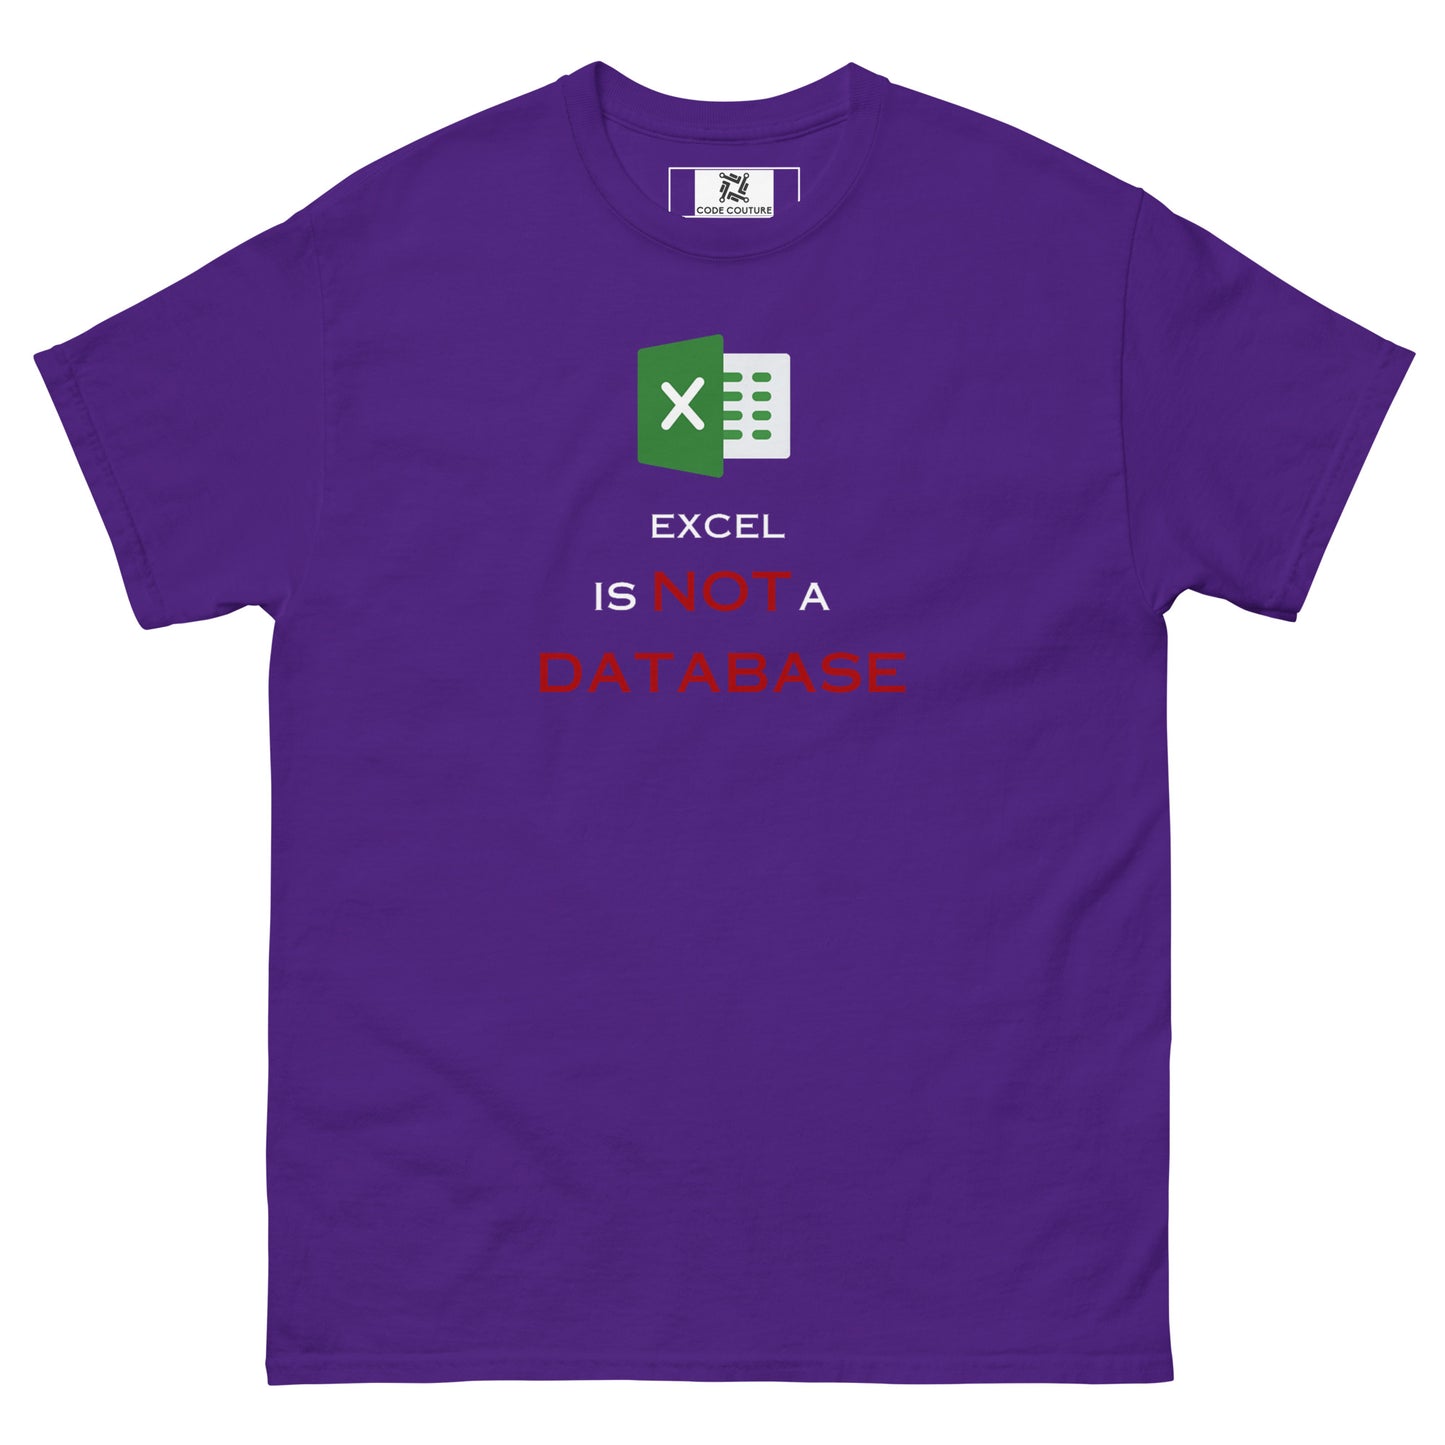 Excel Not a DB classic tee - Dark